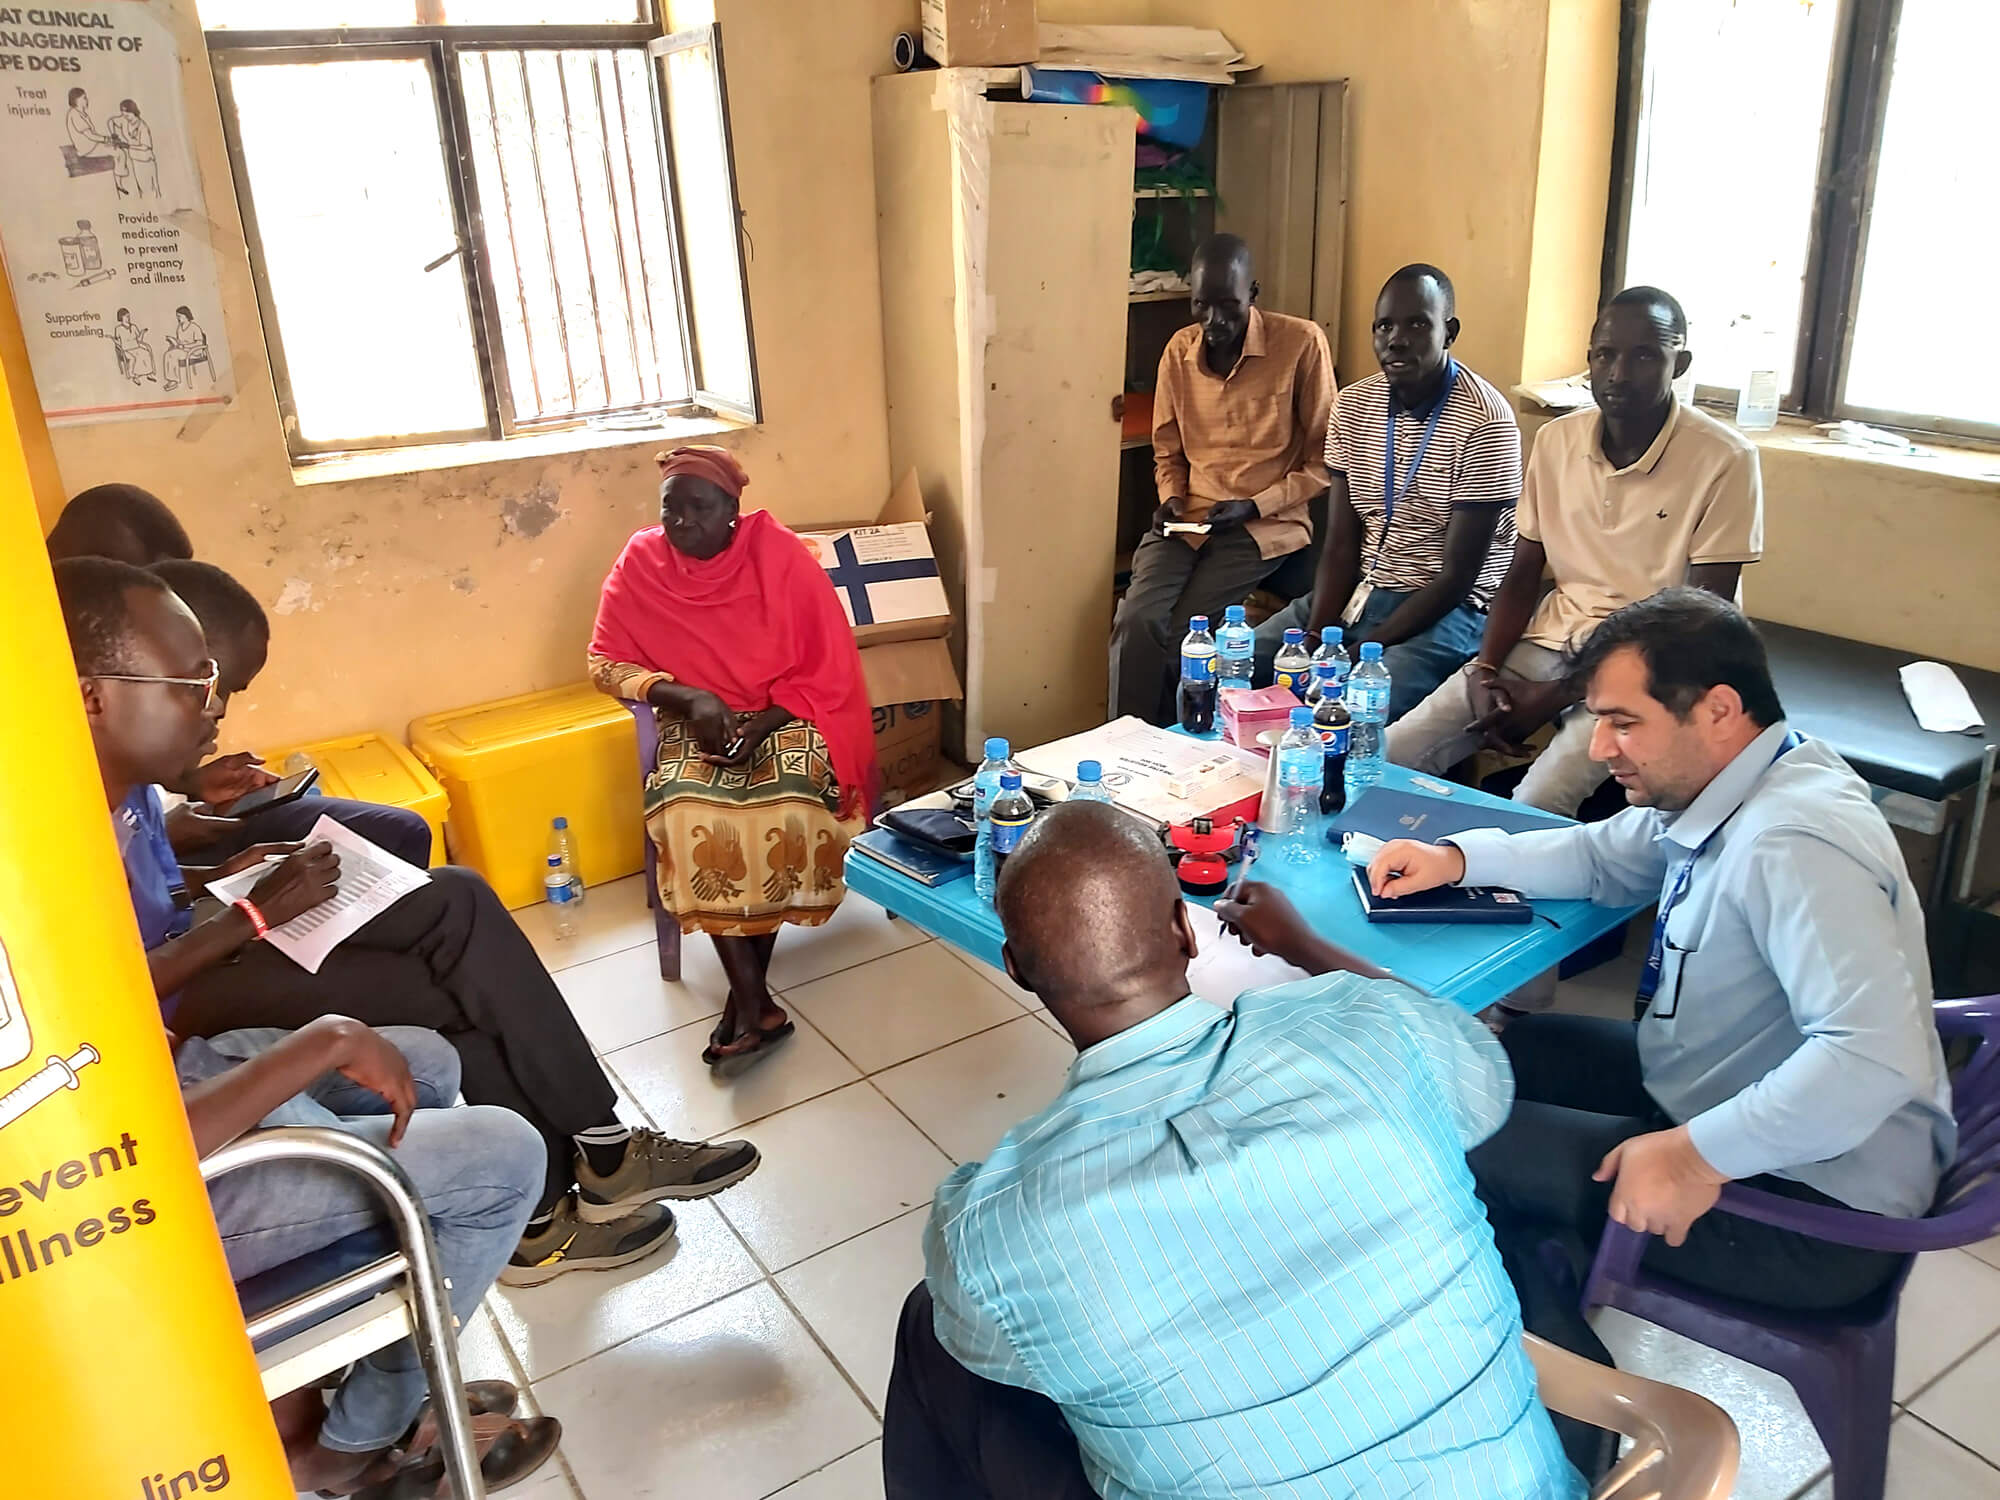 Dr. Ebadullah Hedayat meets with frontline healthcare providers to discuss the gaps and challenges they face at Malakal Teaching Hospital.